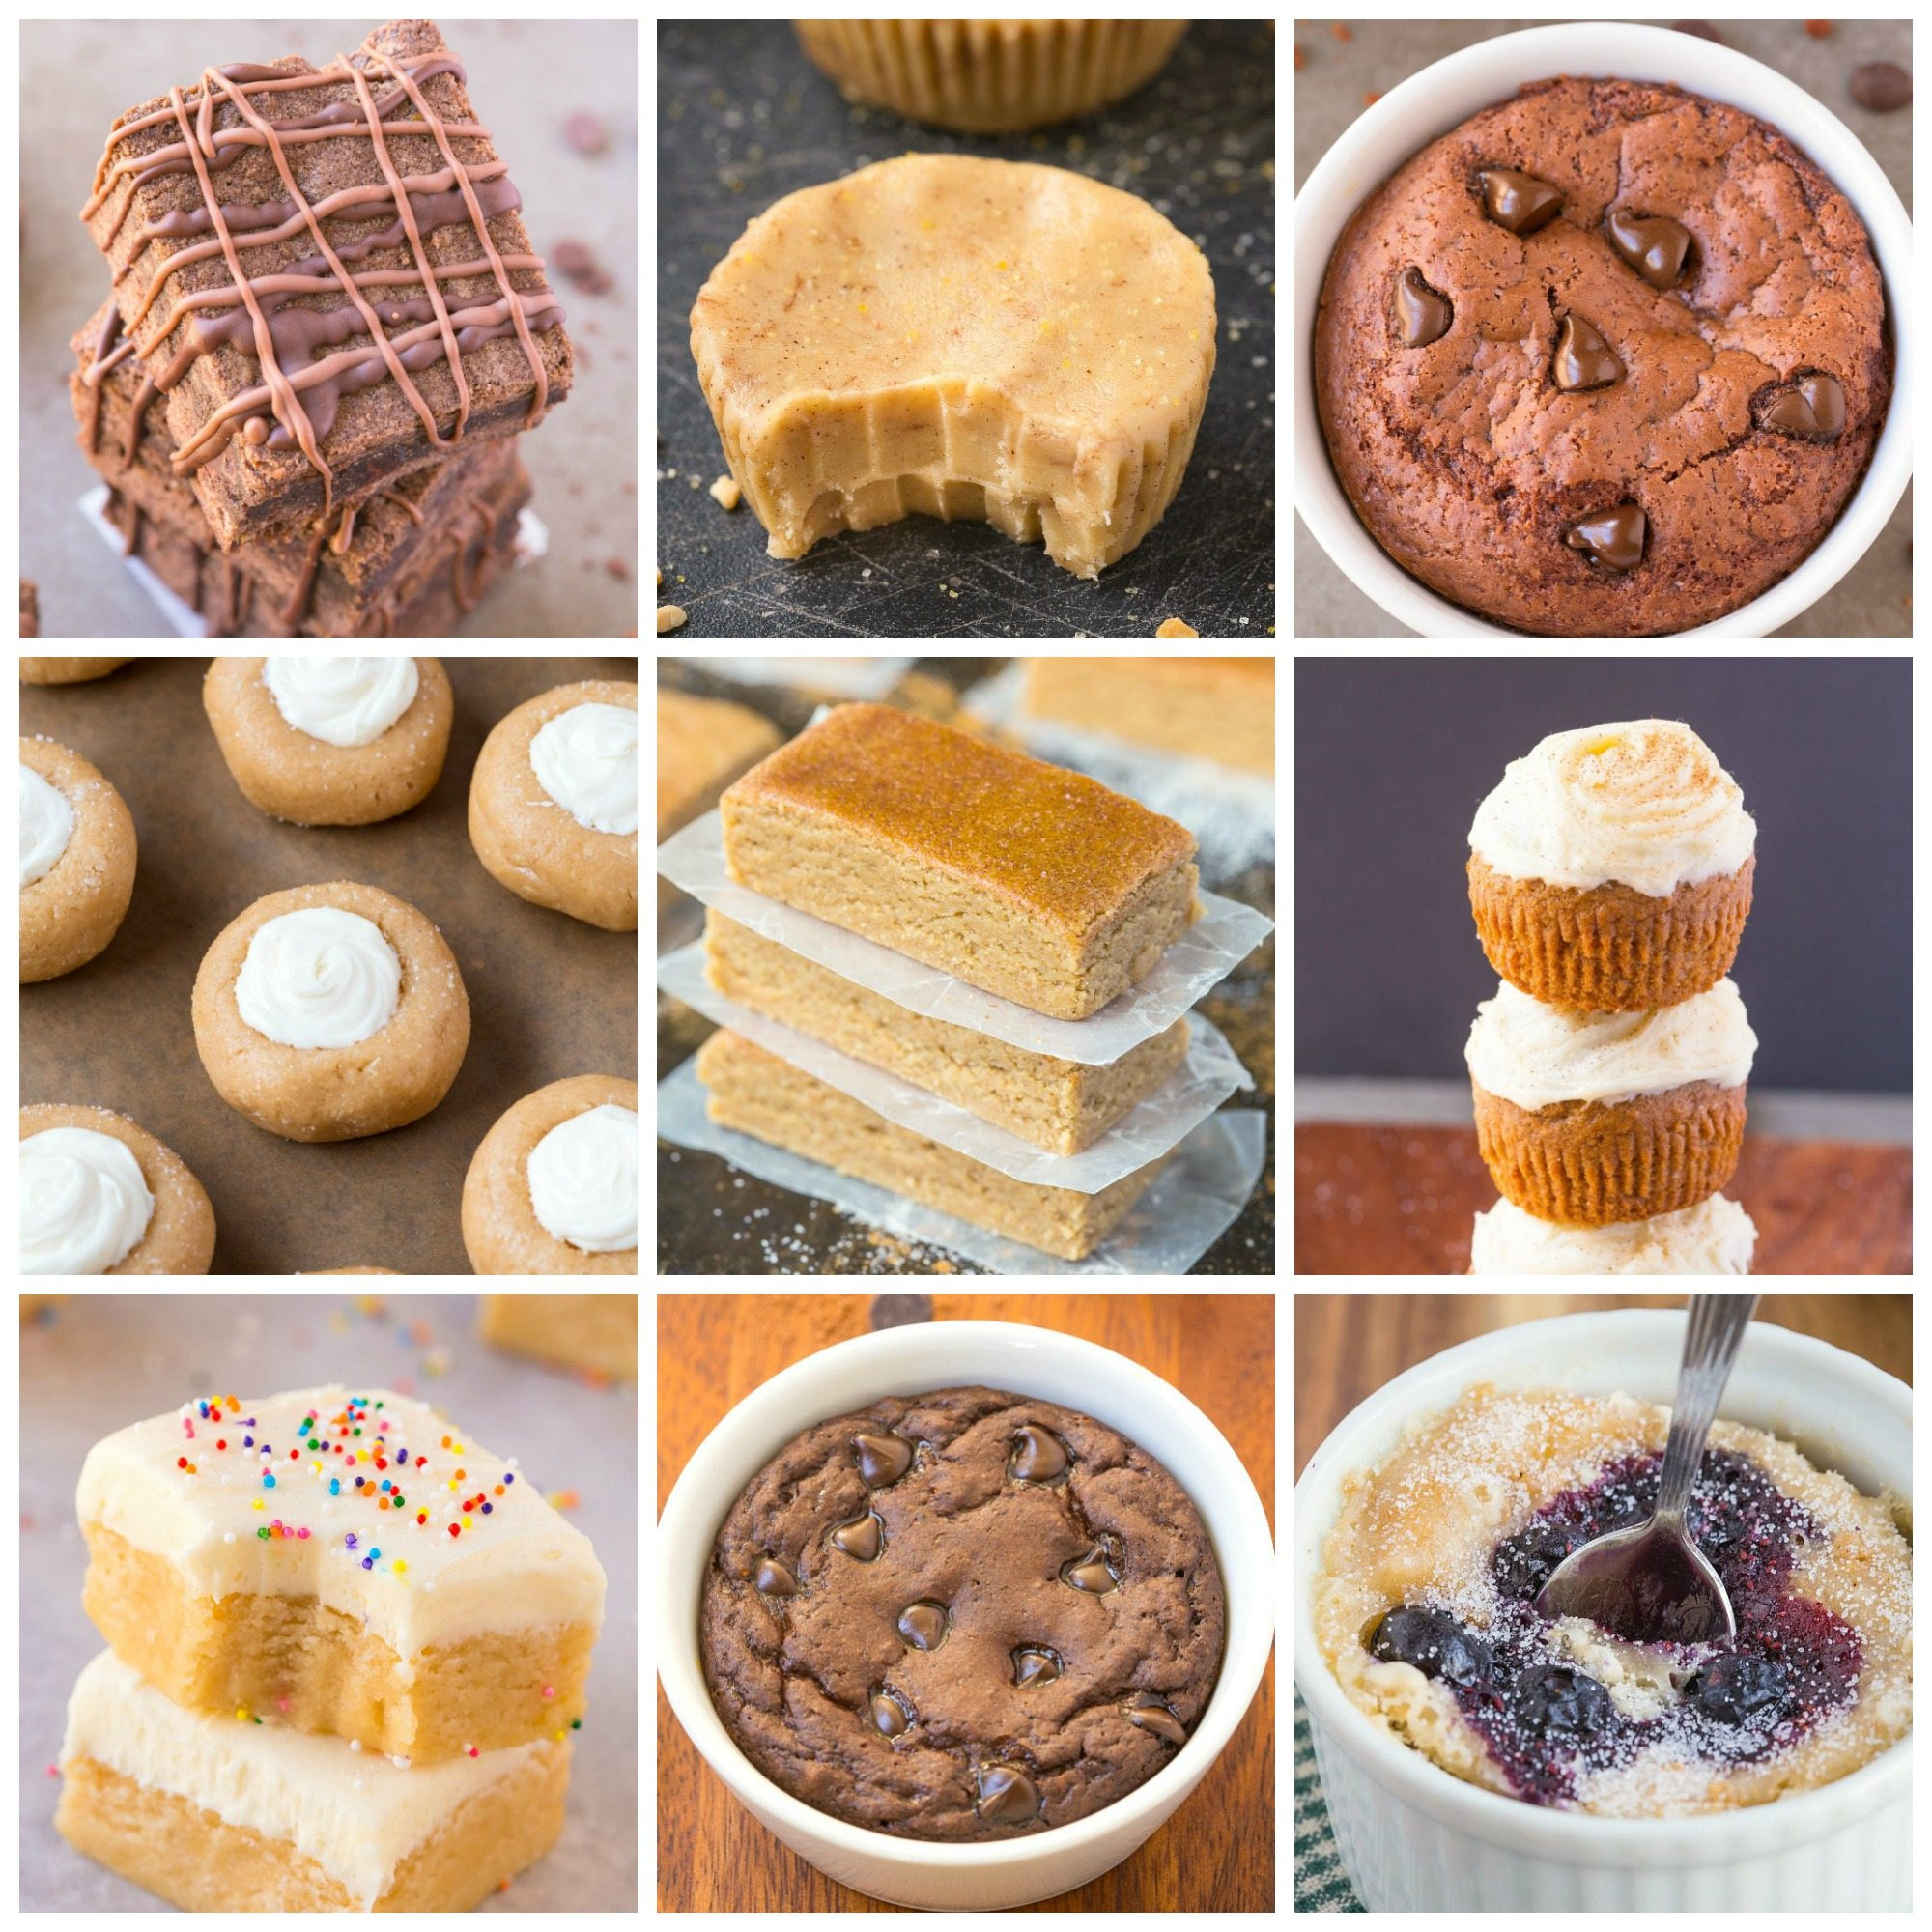 Healthy Snacks And Desserts
 15 Healthy Desserts and Snacks Under 200 Calories